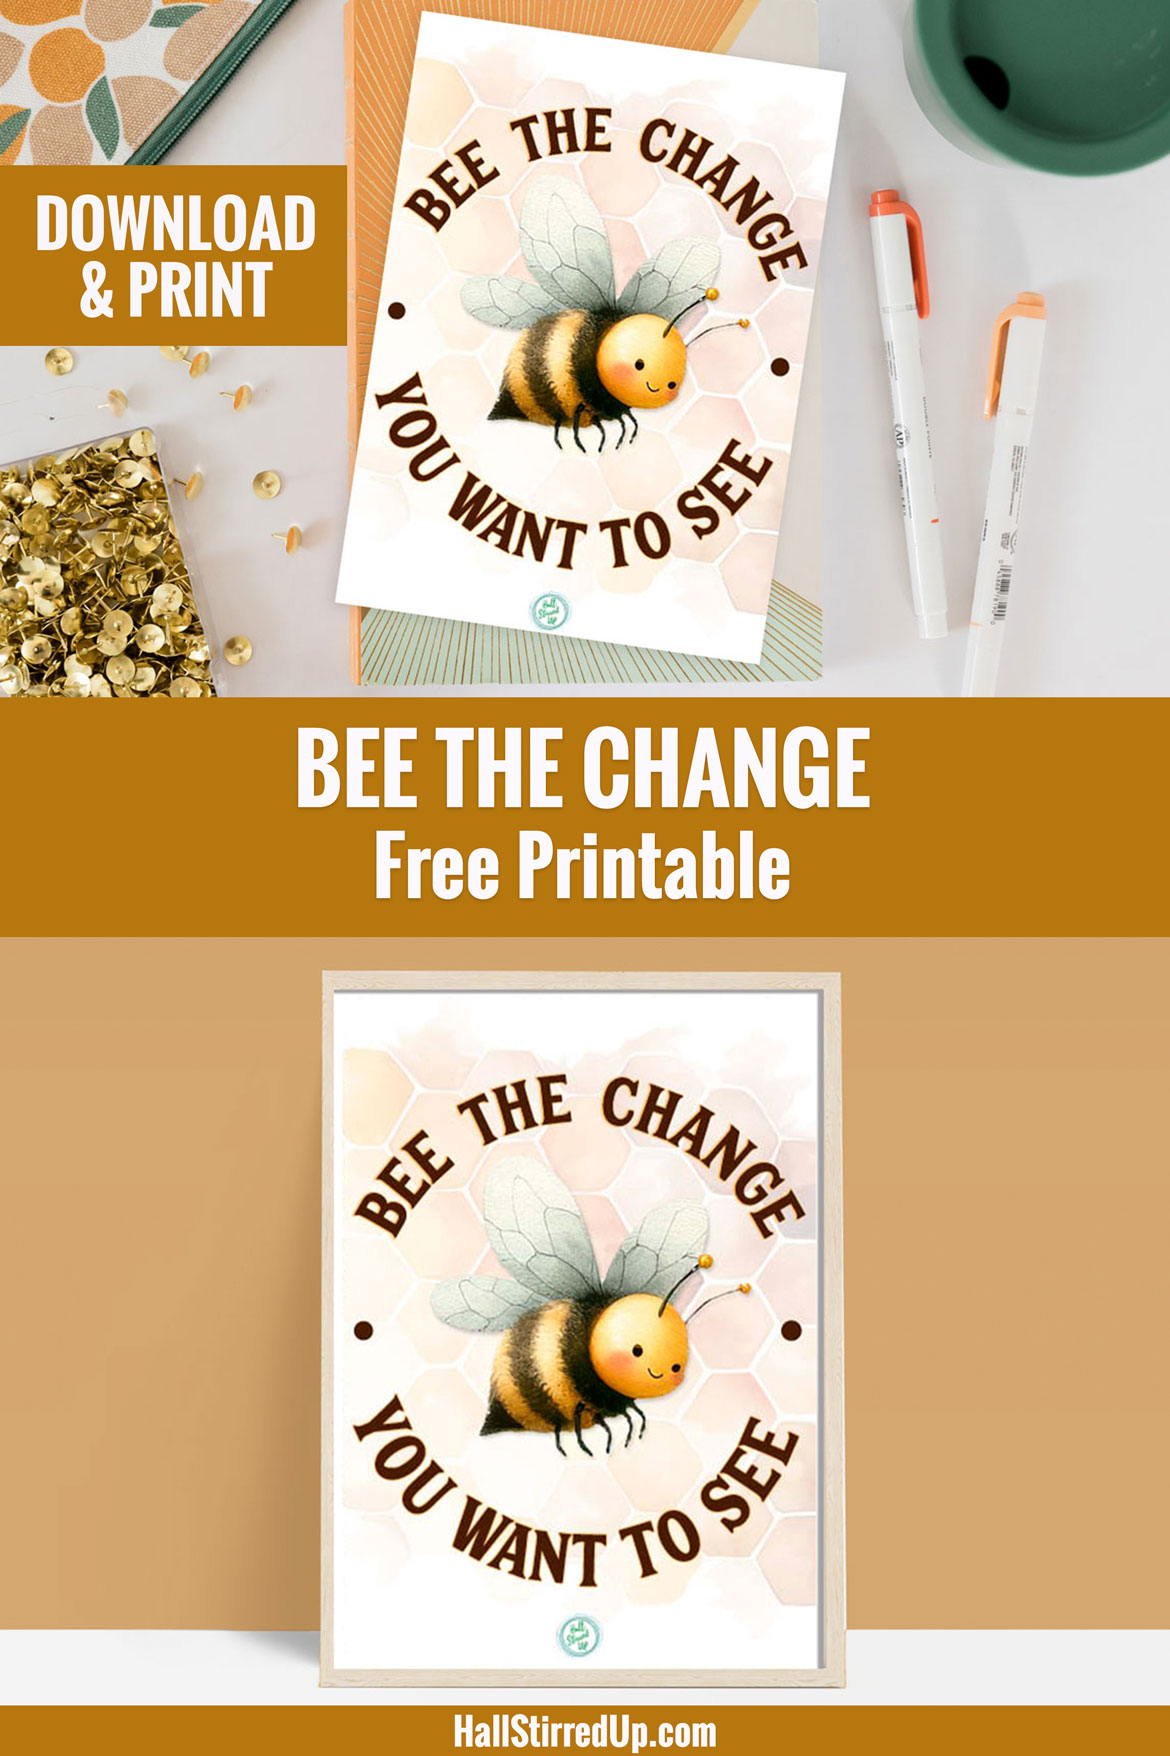 Celebrate Earth Day with a free 'Bee the Change' printable